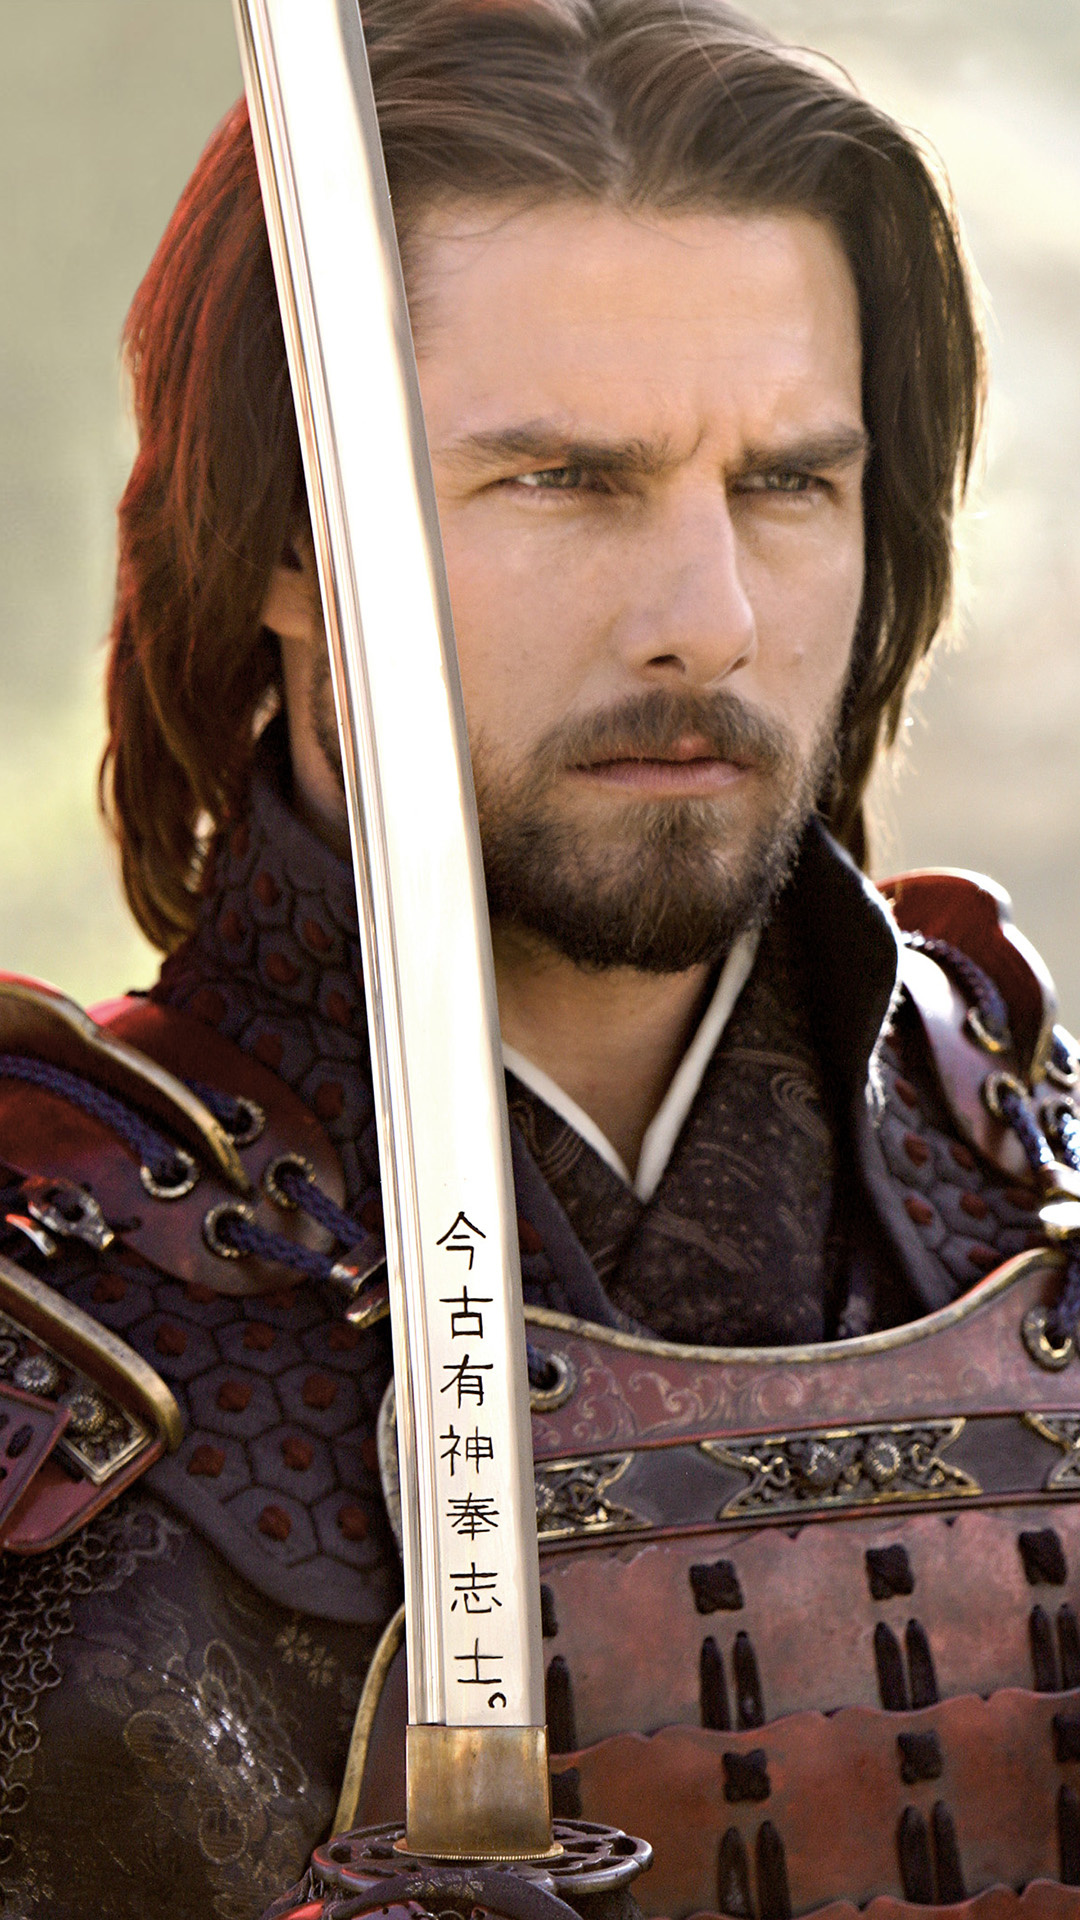 The Last Samurai Tom Cruise, Best HTC One wallpapers, Desktop background, Iconic movie, 1080x1920 Full HD Phone